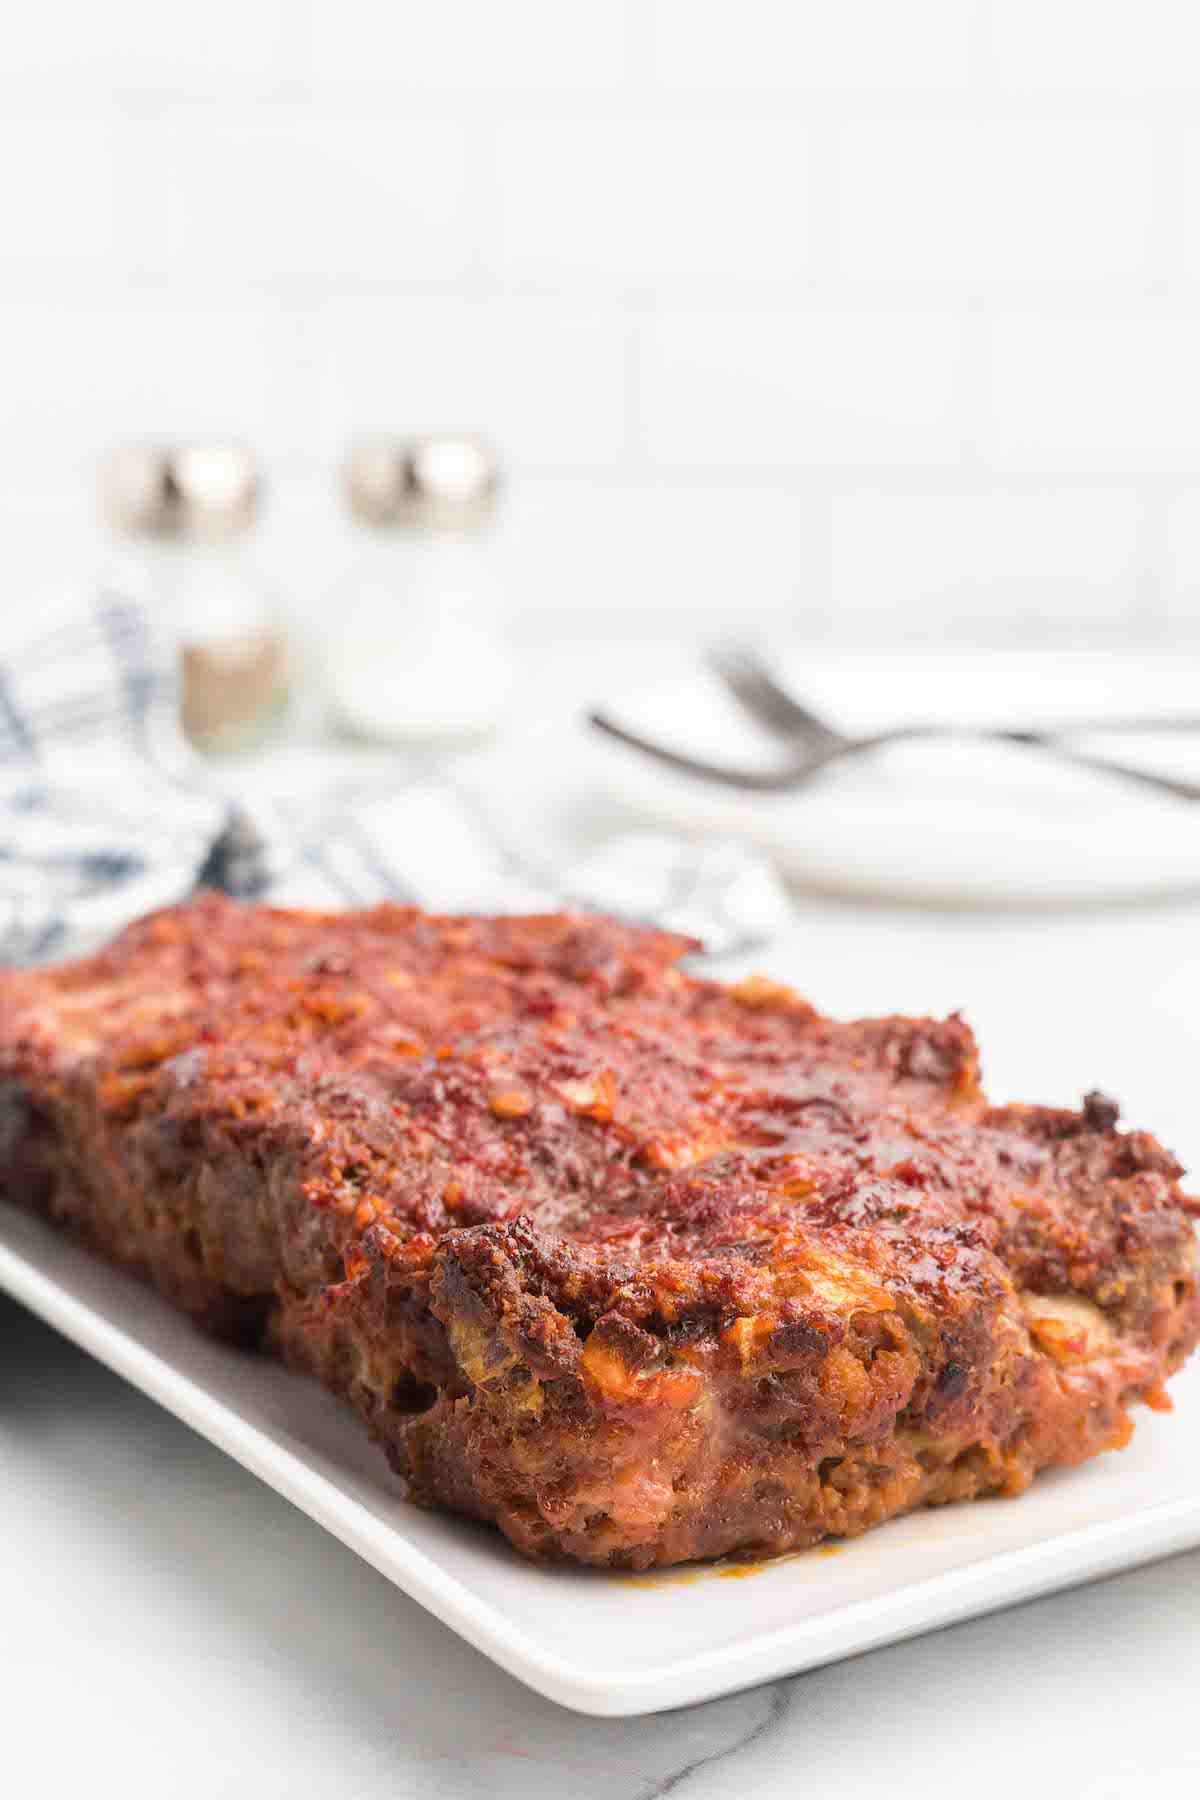 Traeger Smoked Meatloaf Recipe